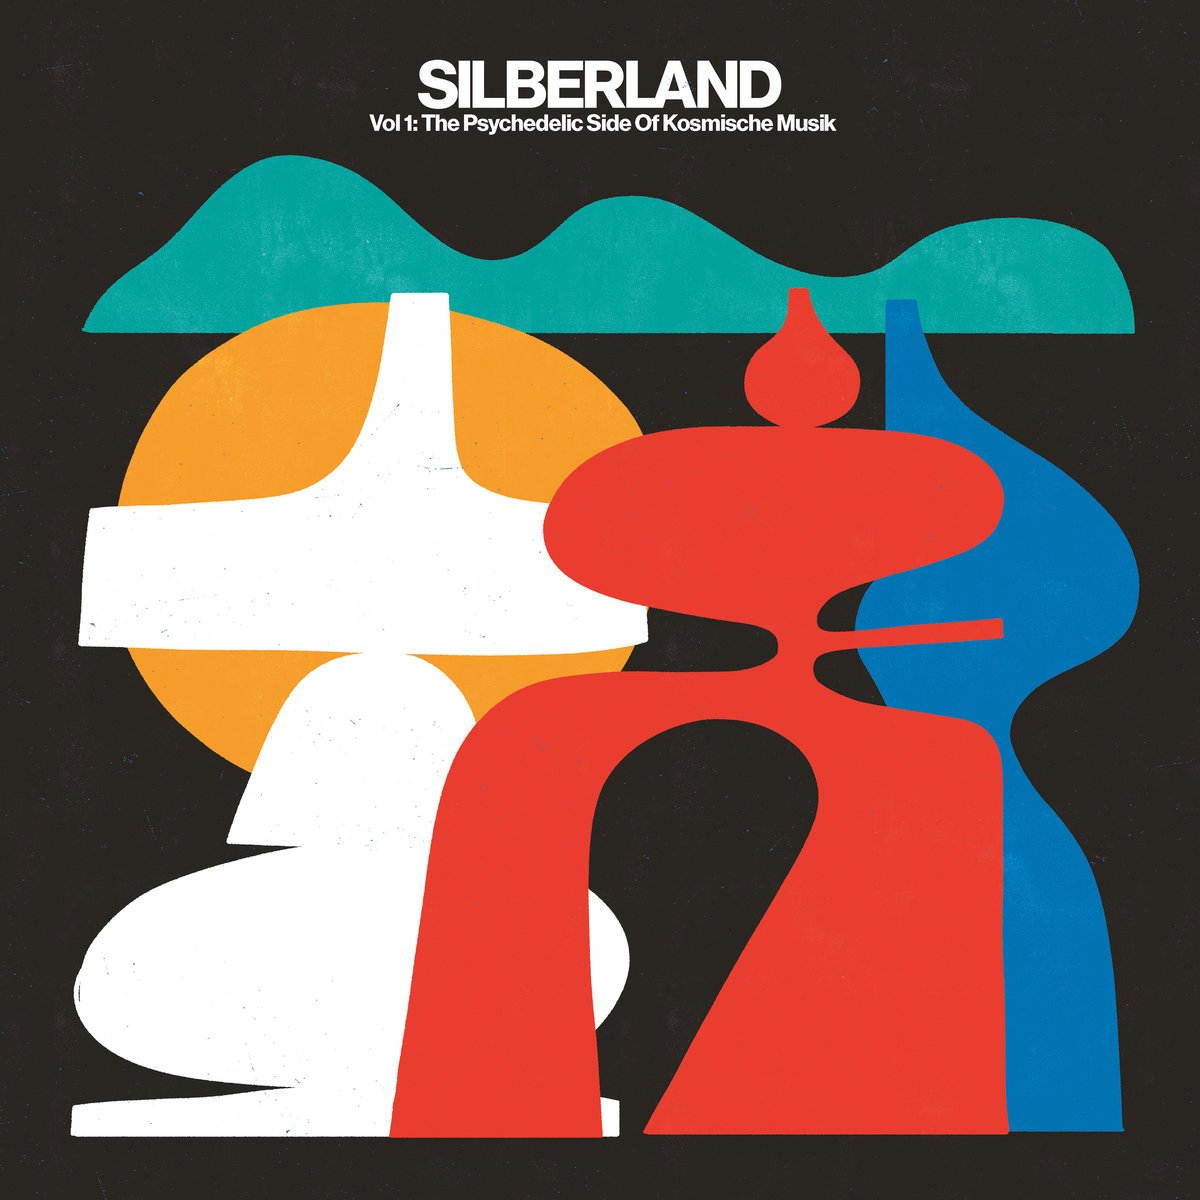 Silberland: The Psychedelic Side of Kosmische Musik